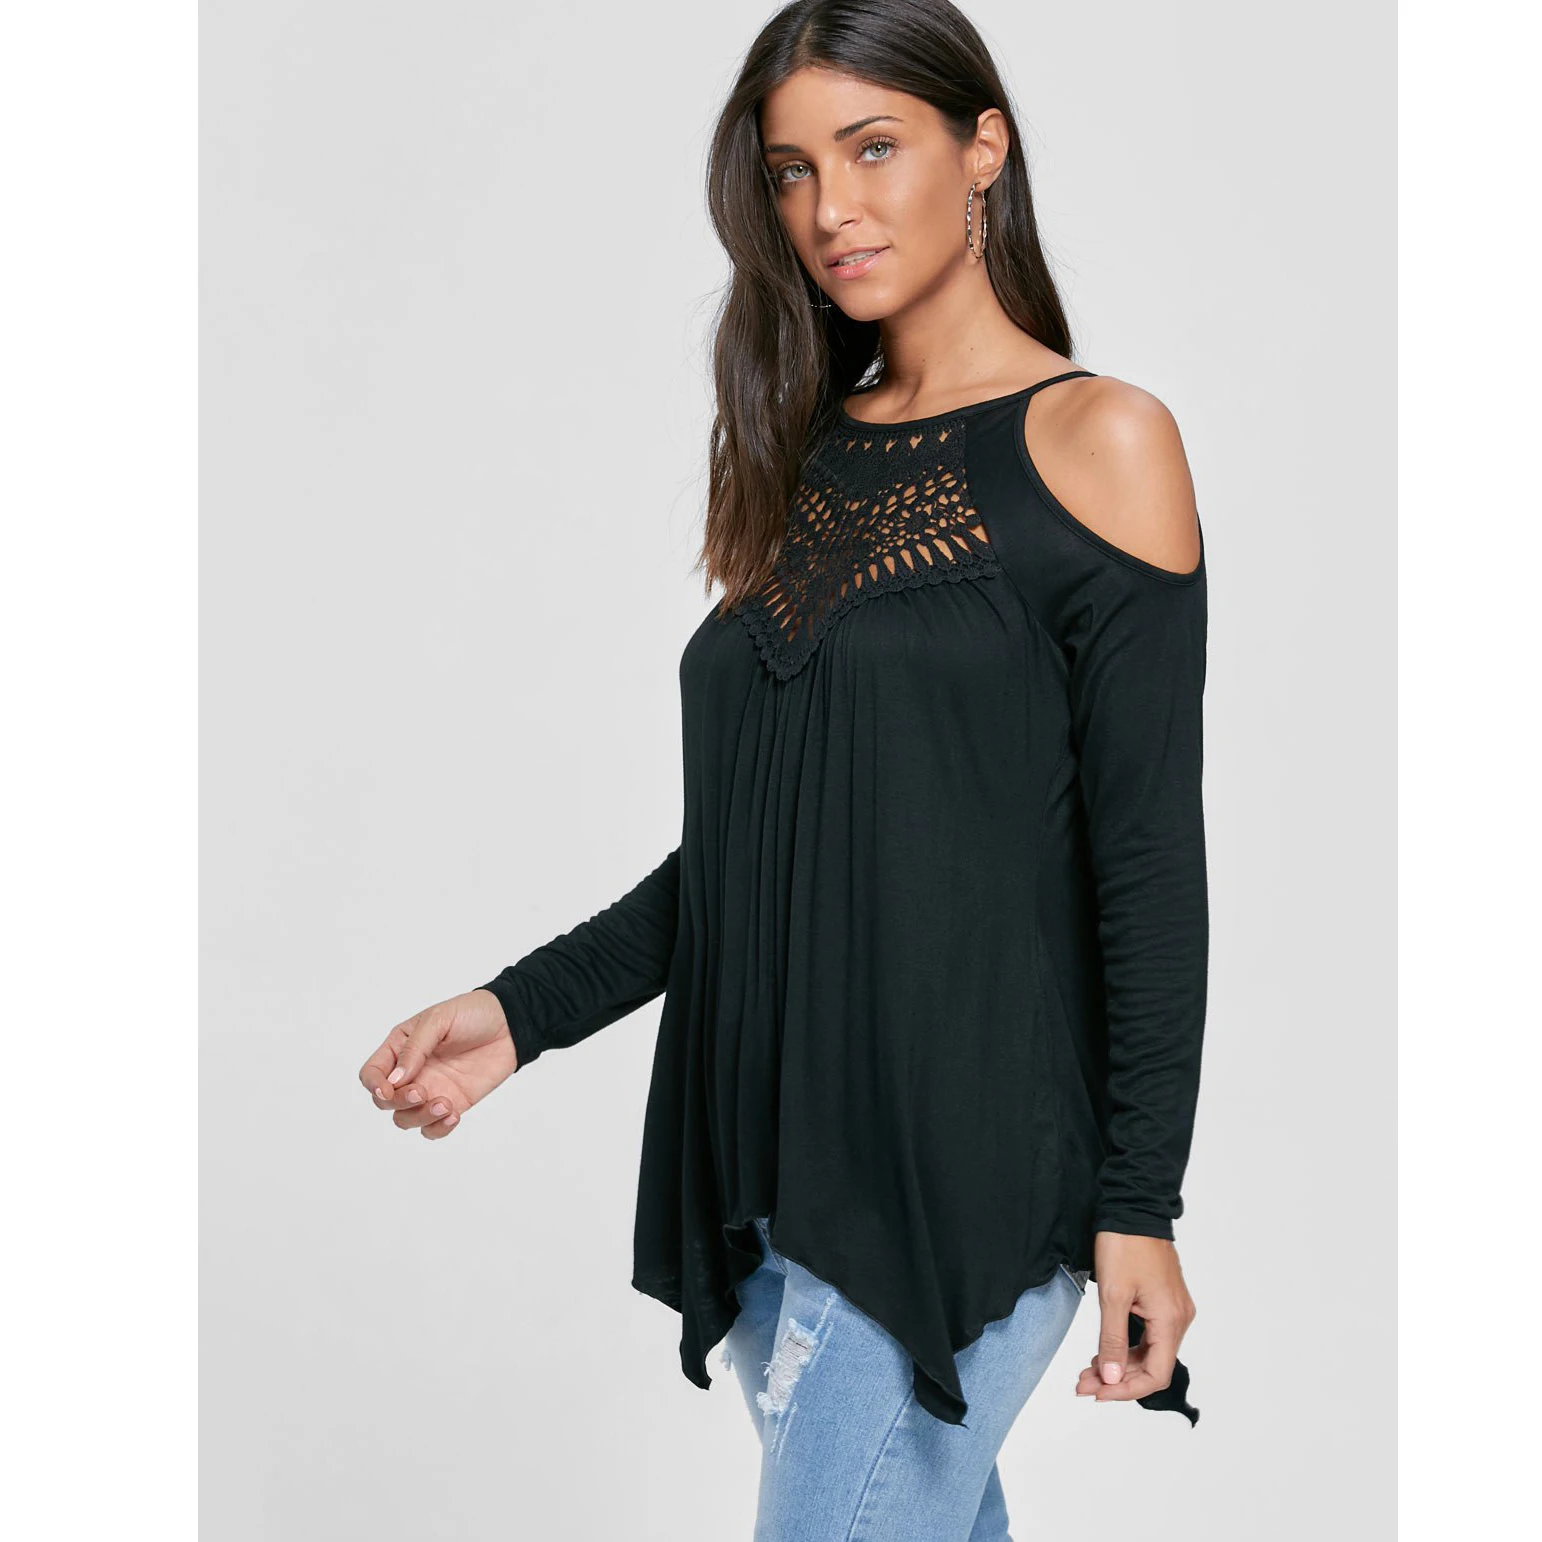  Women's Clothes Fashion Casual Cold Shoulder Handkerchief Irregular Tops Casual Tops for WomenTops 